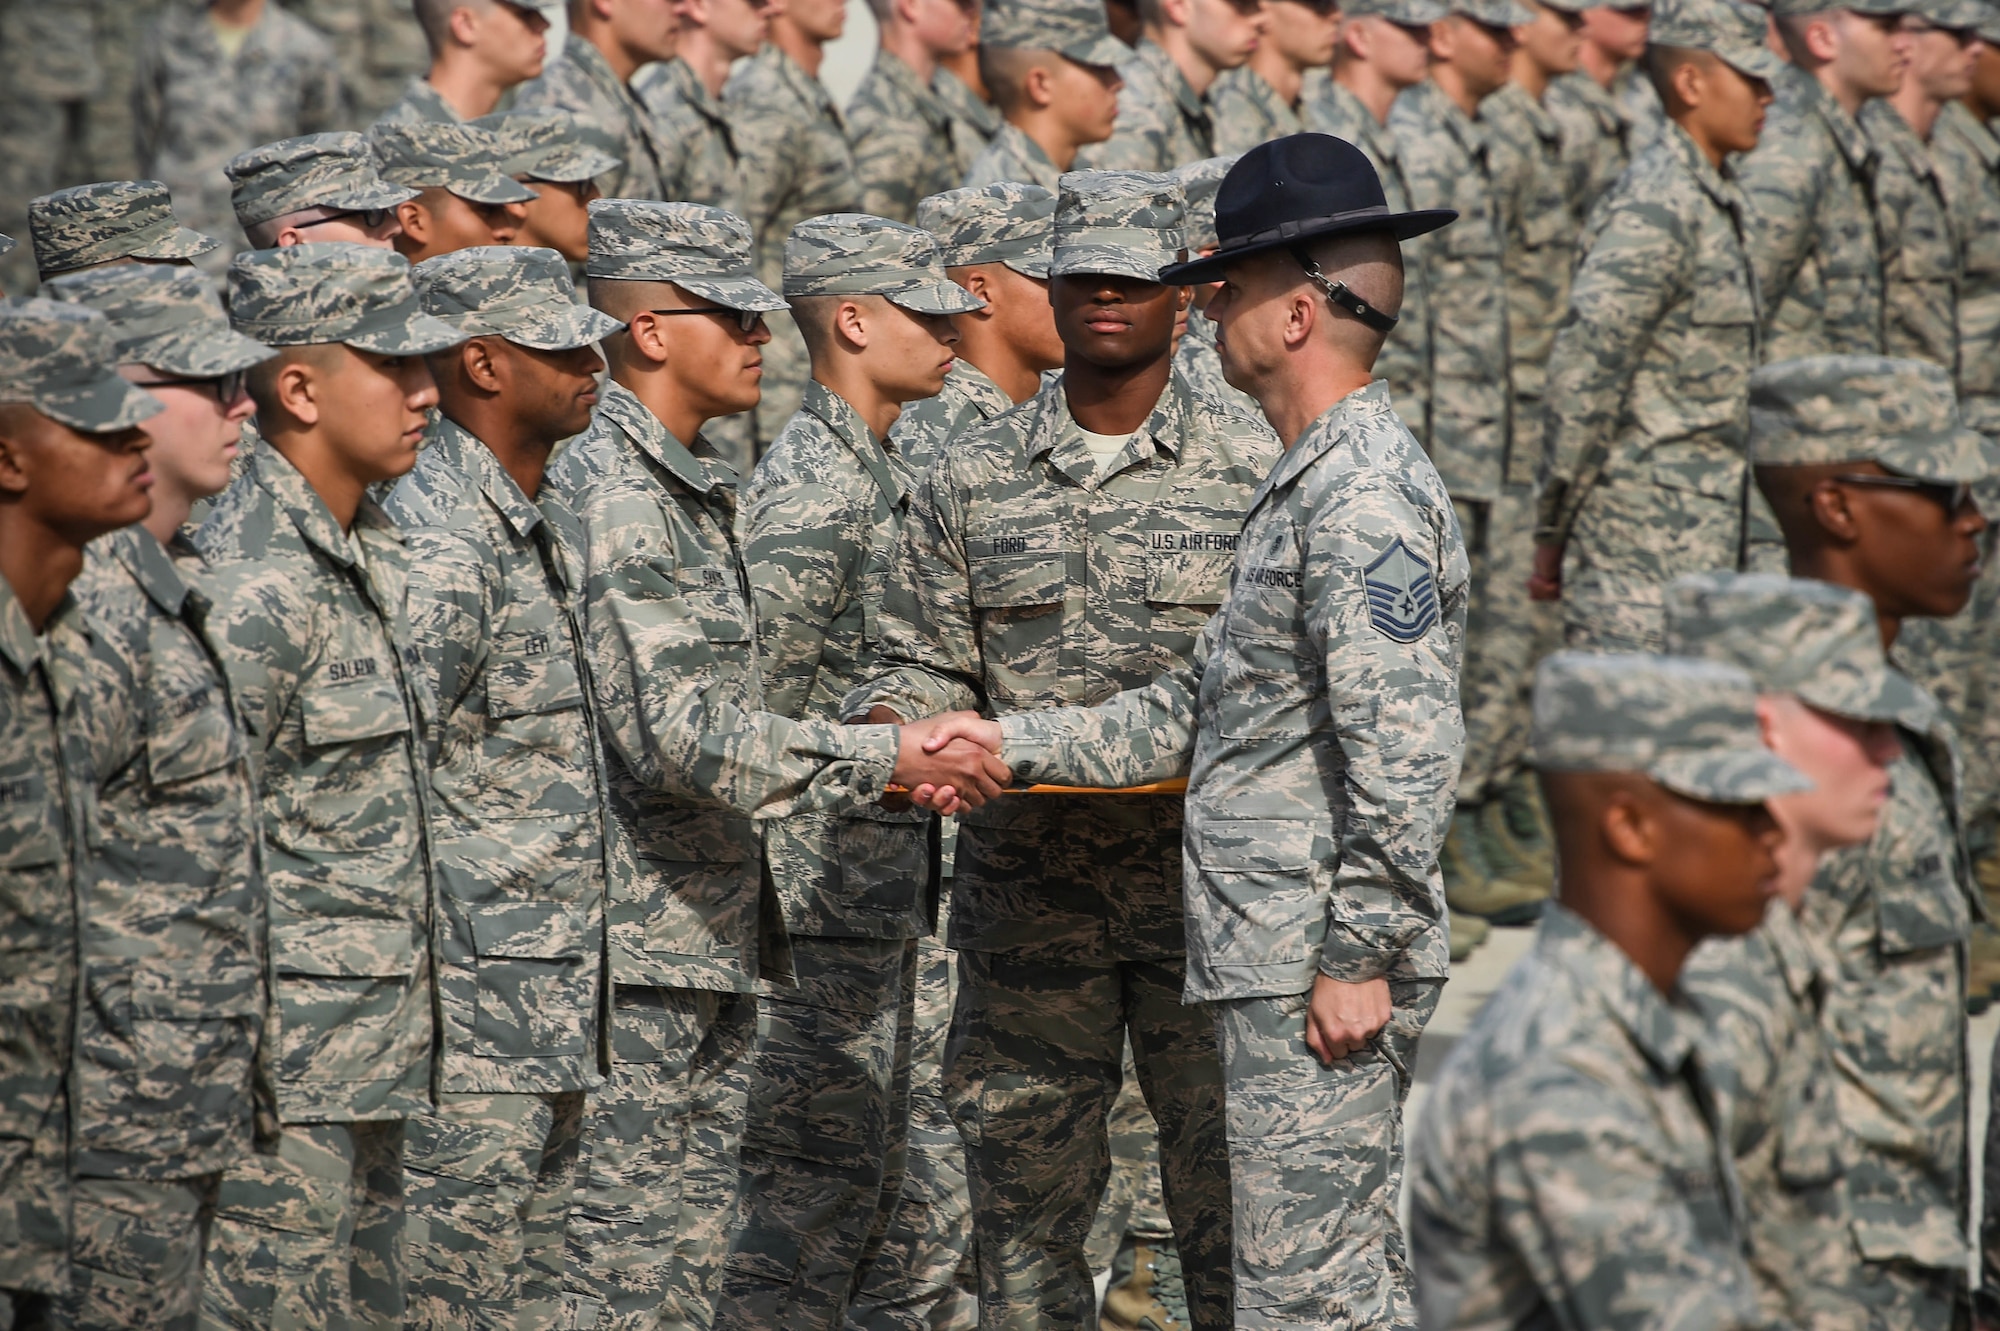 A military training instructor presents an Airman's coin